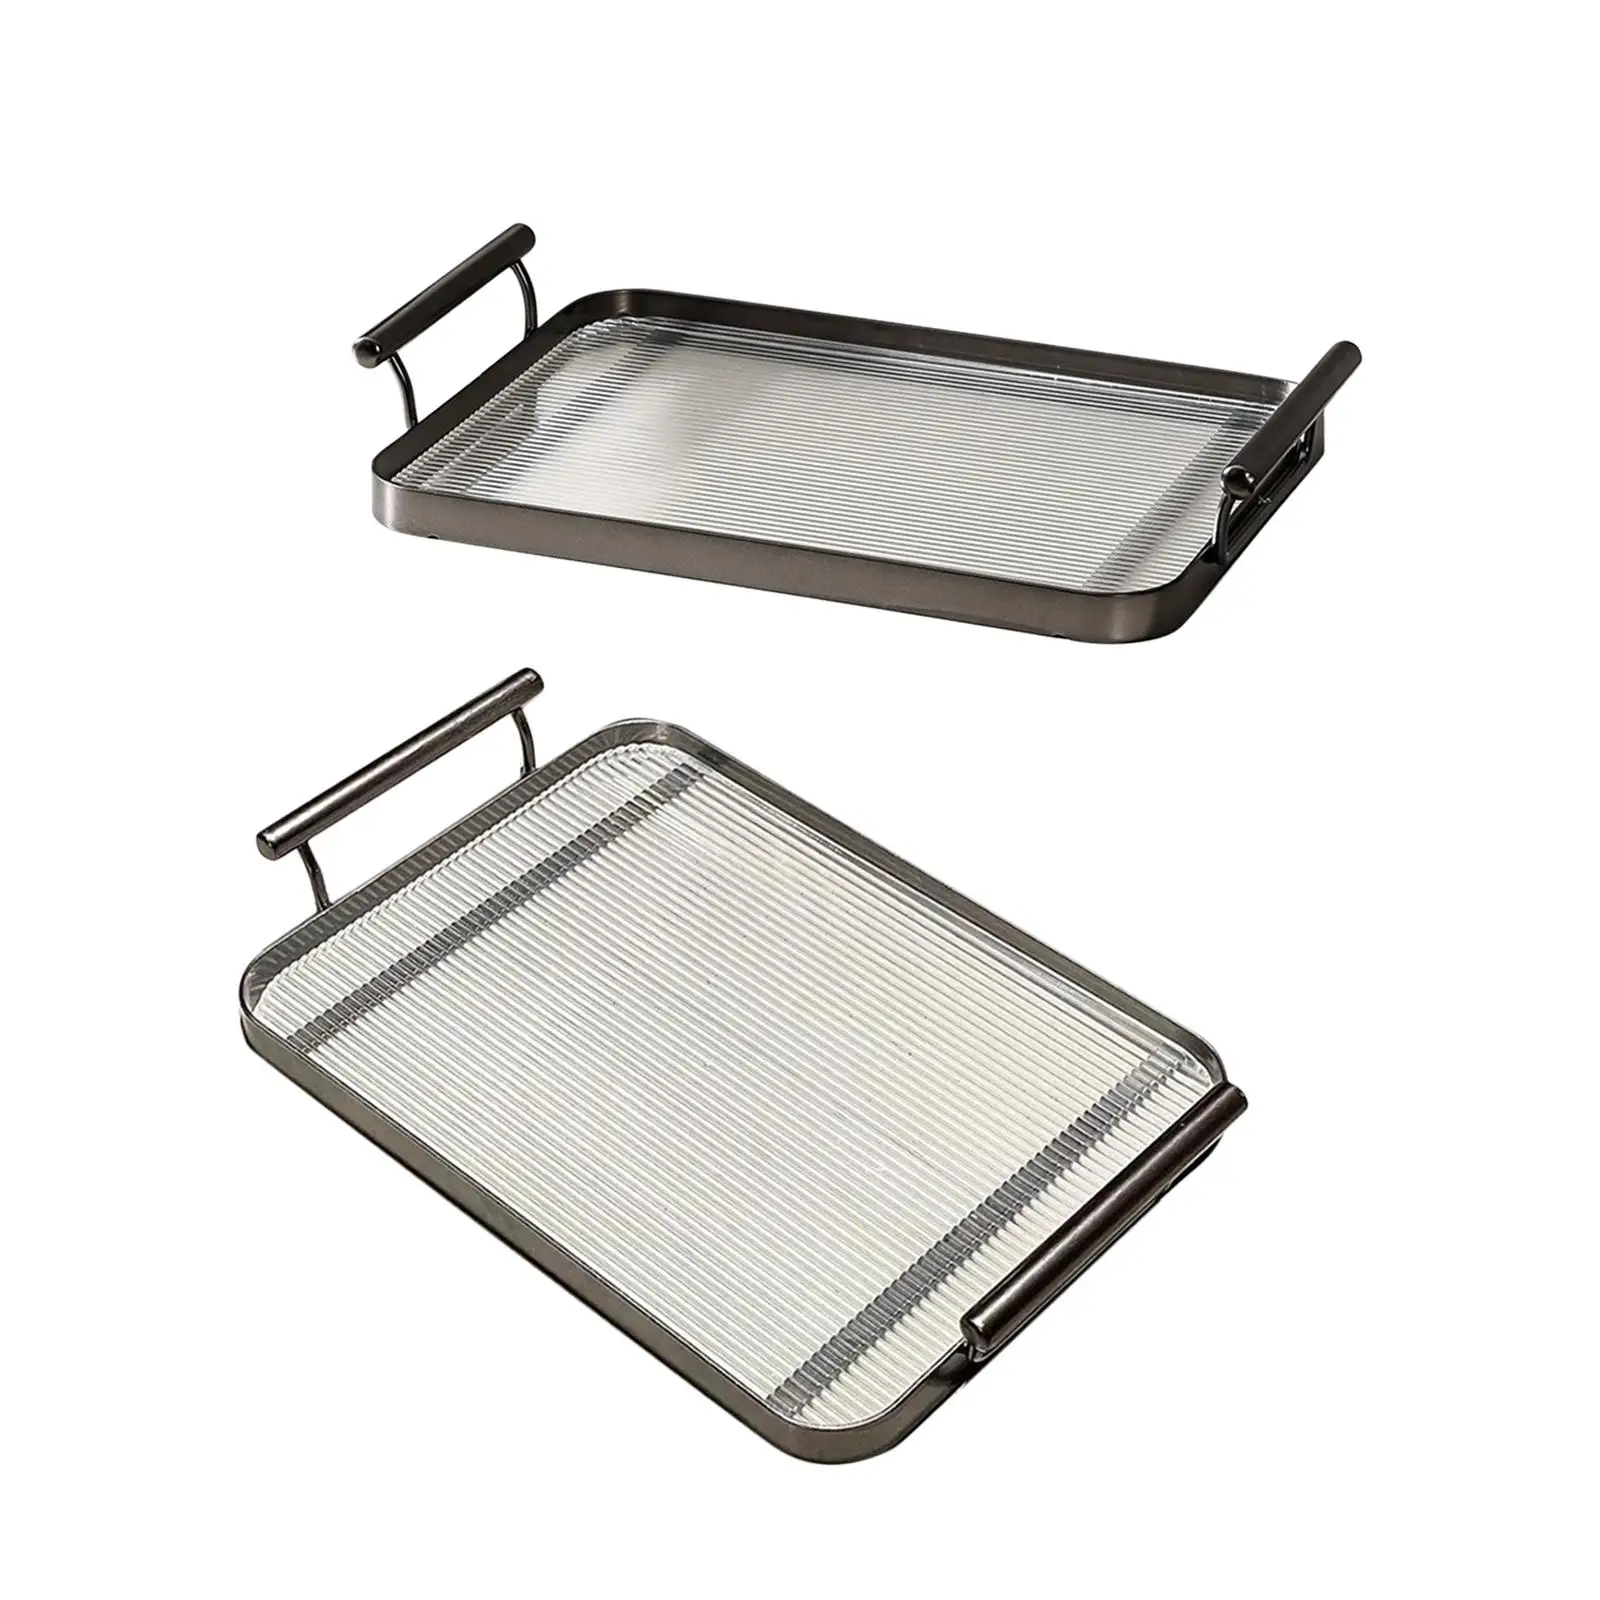 Acrylic Serving Tray with Handles Versatile Fruit Dessert Tray Durable Makeup Tray for Office Meals Snacks Party Bathroom Vanity